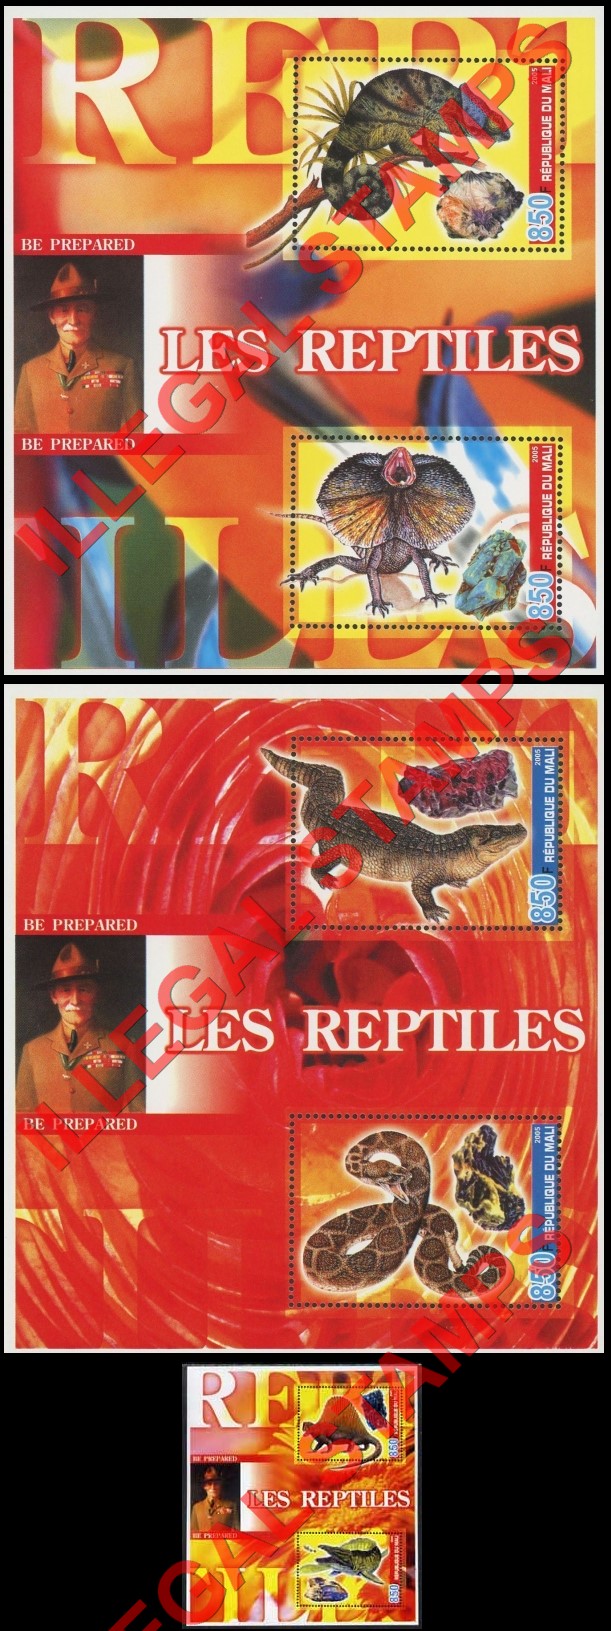 Mali 2005 Reptiles, Minerals and Baden Powell Illegal Stamp Souvenir Sheet of 2